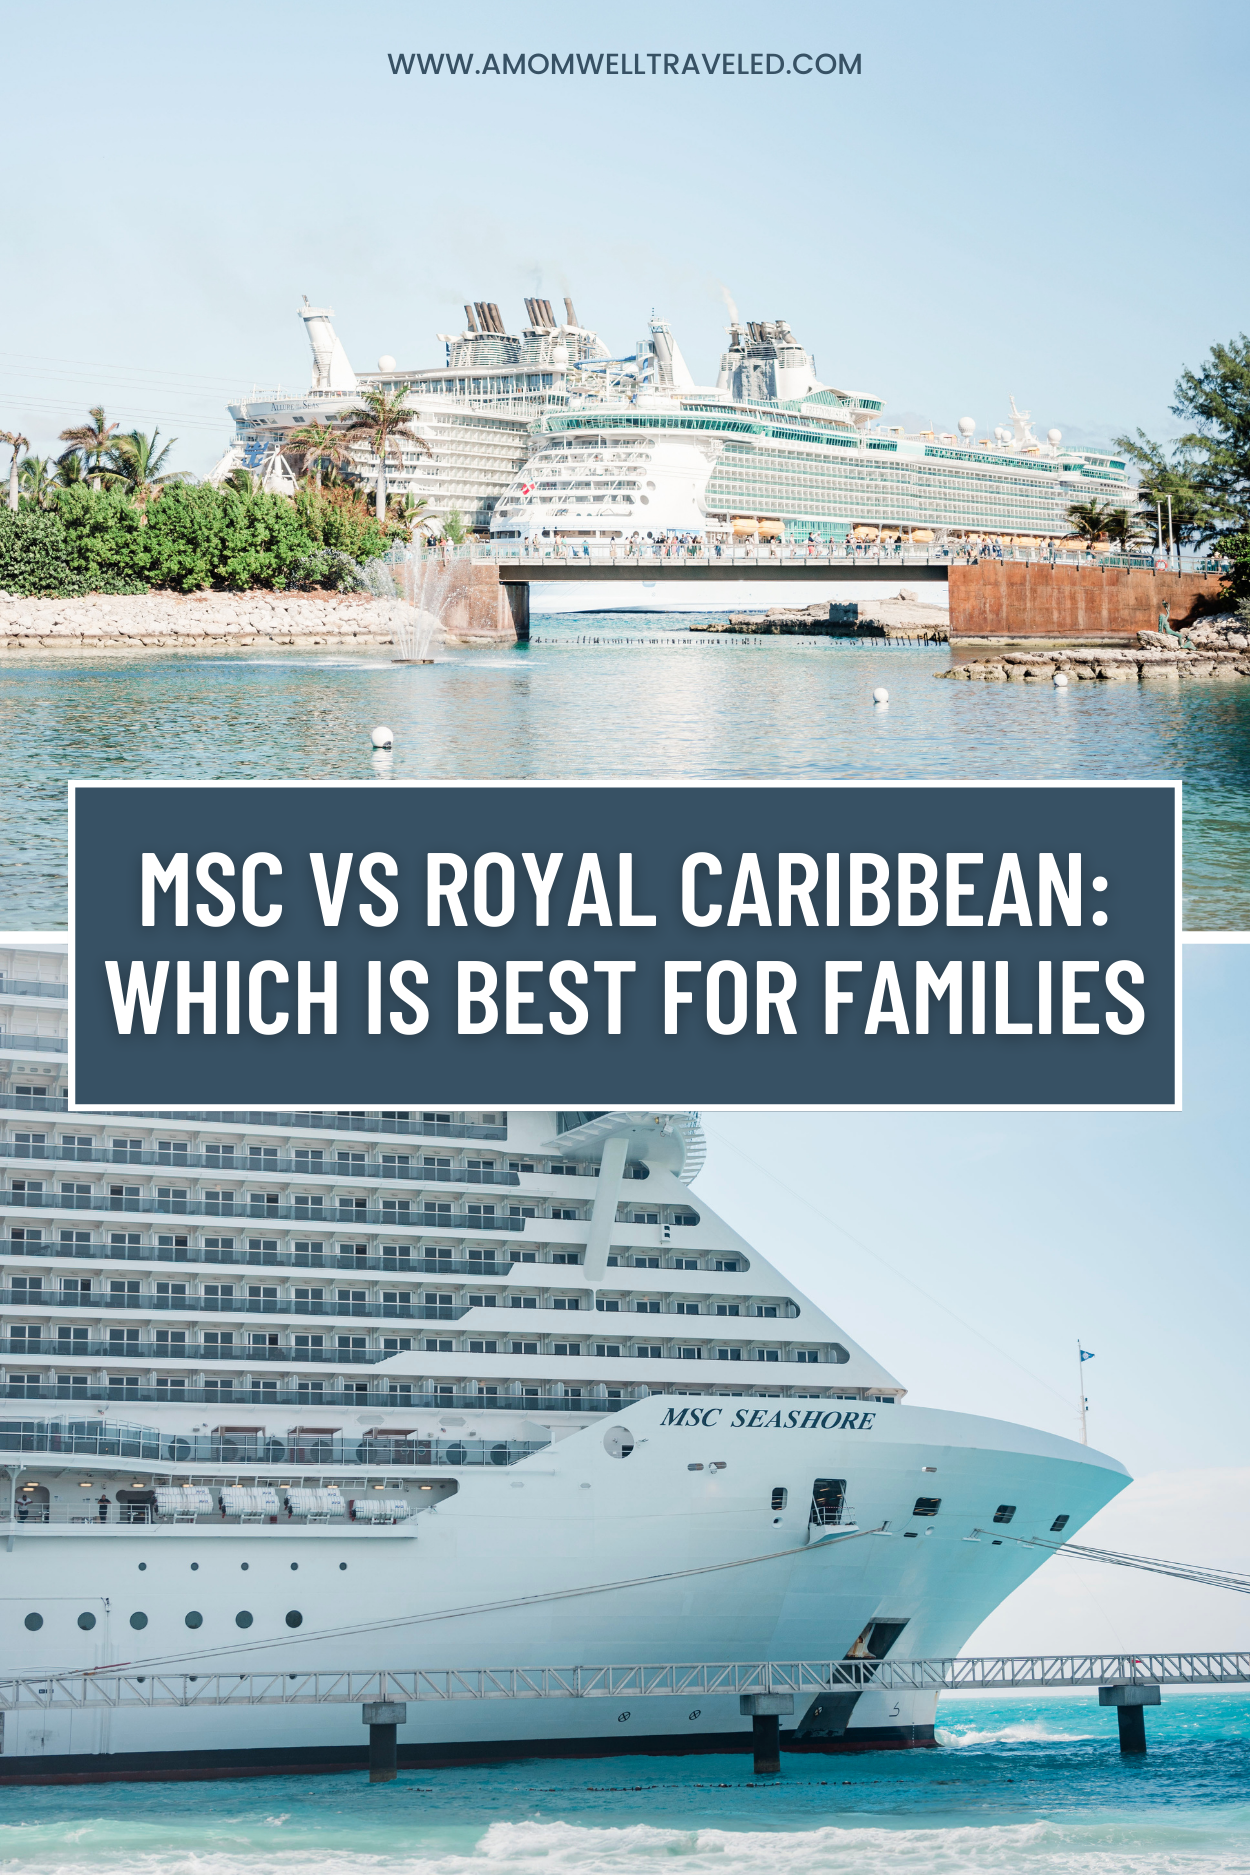 MSC vs Royal Caribbean: which is best for families? MSC Seashore vs Allure of the Seas.